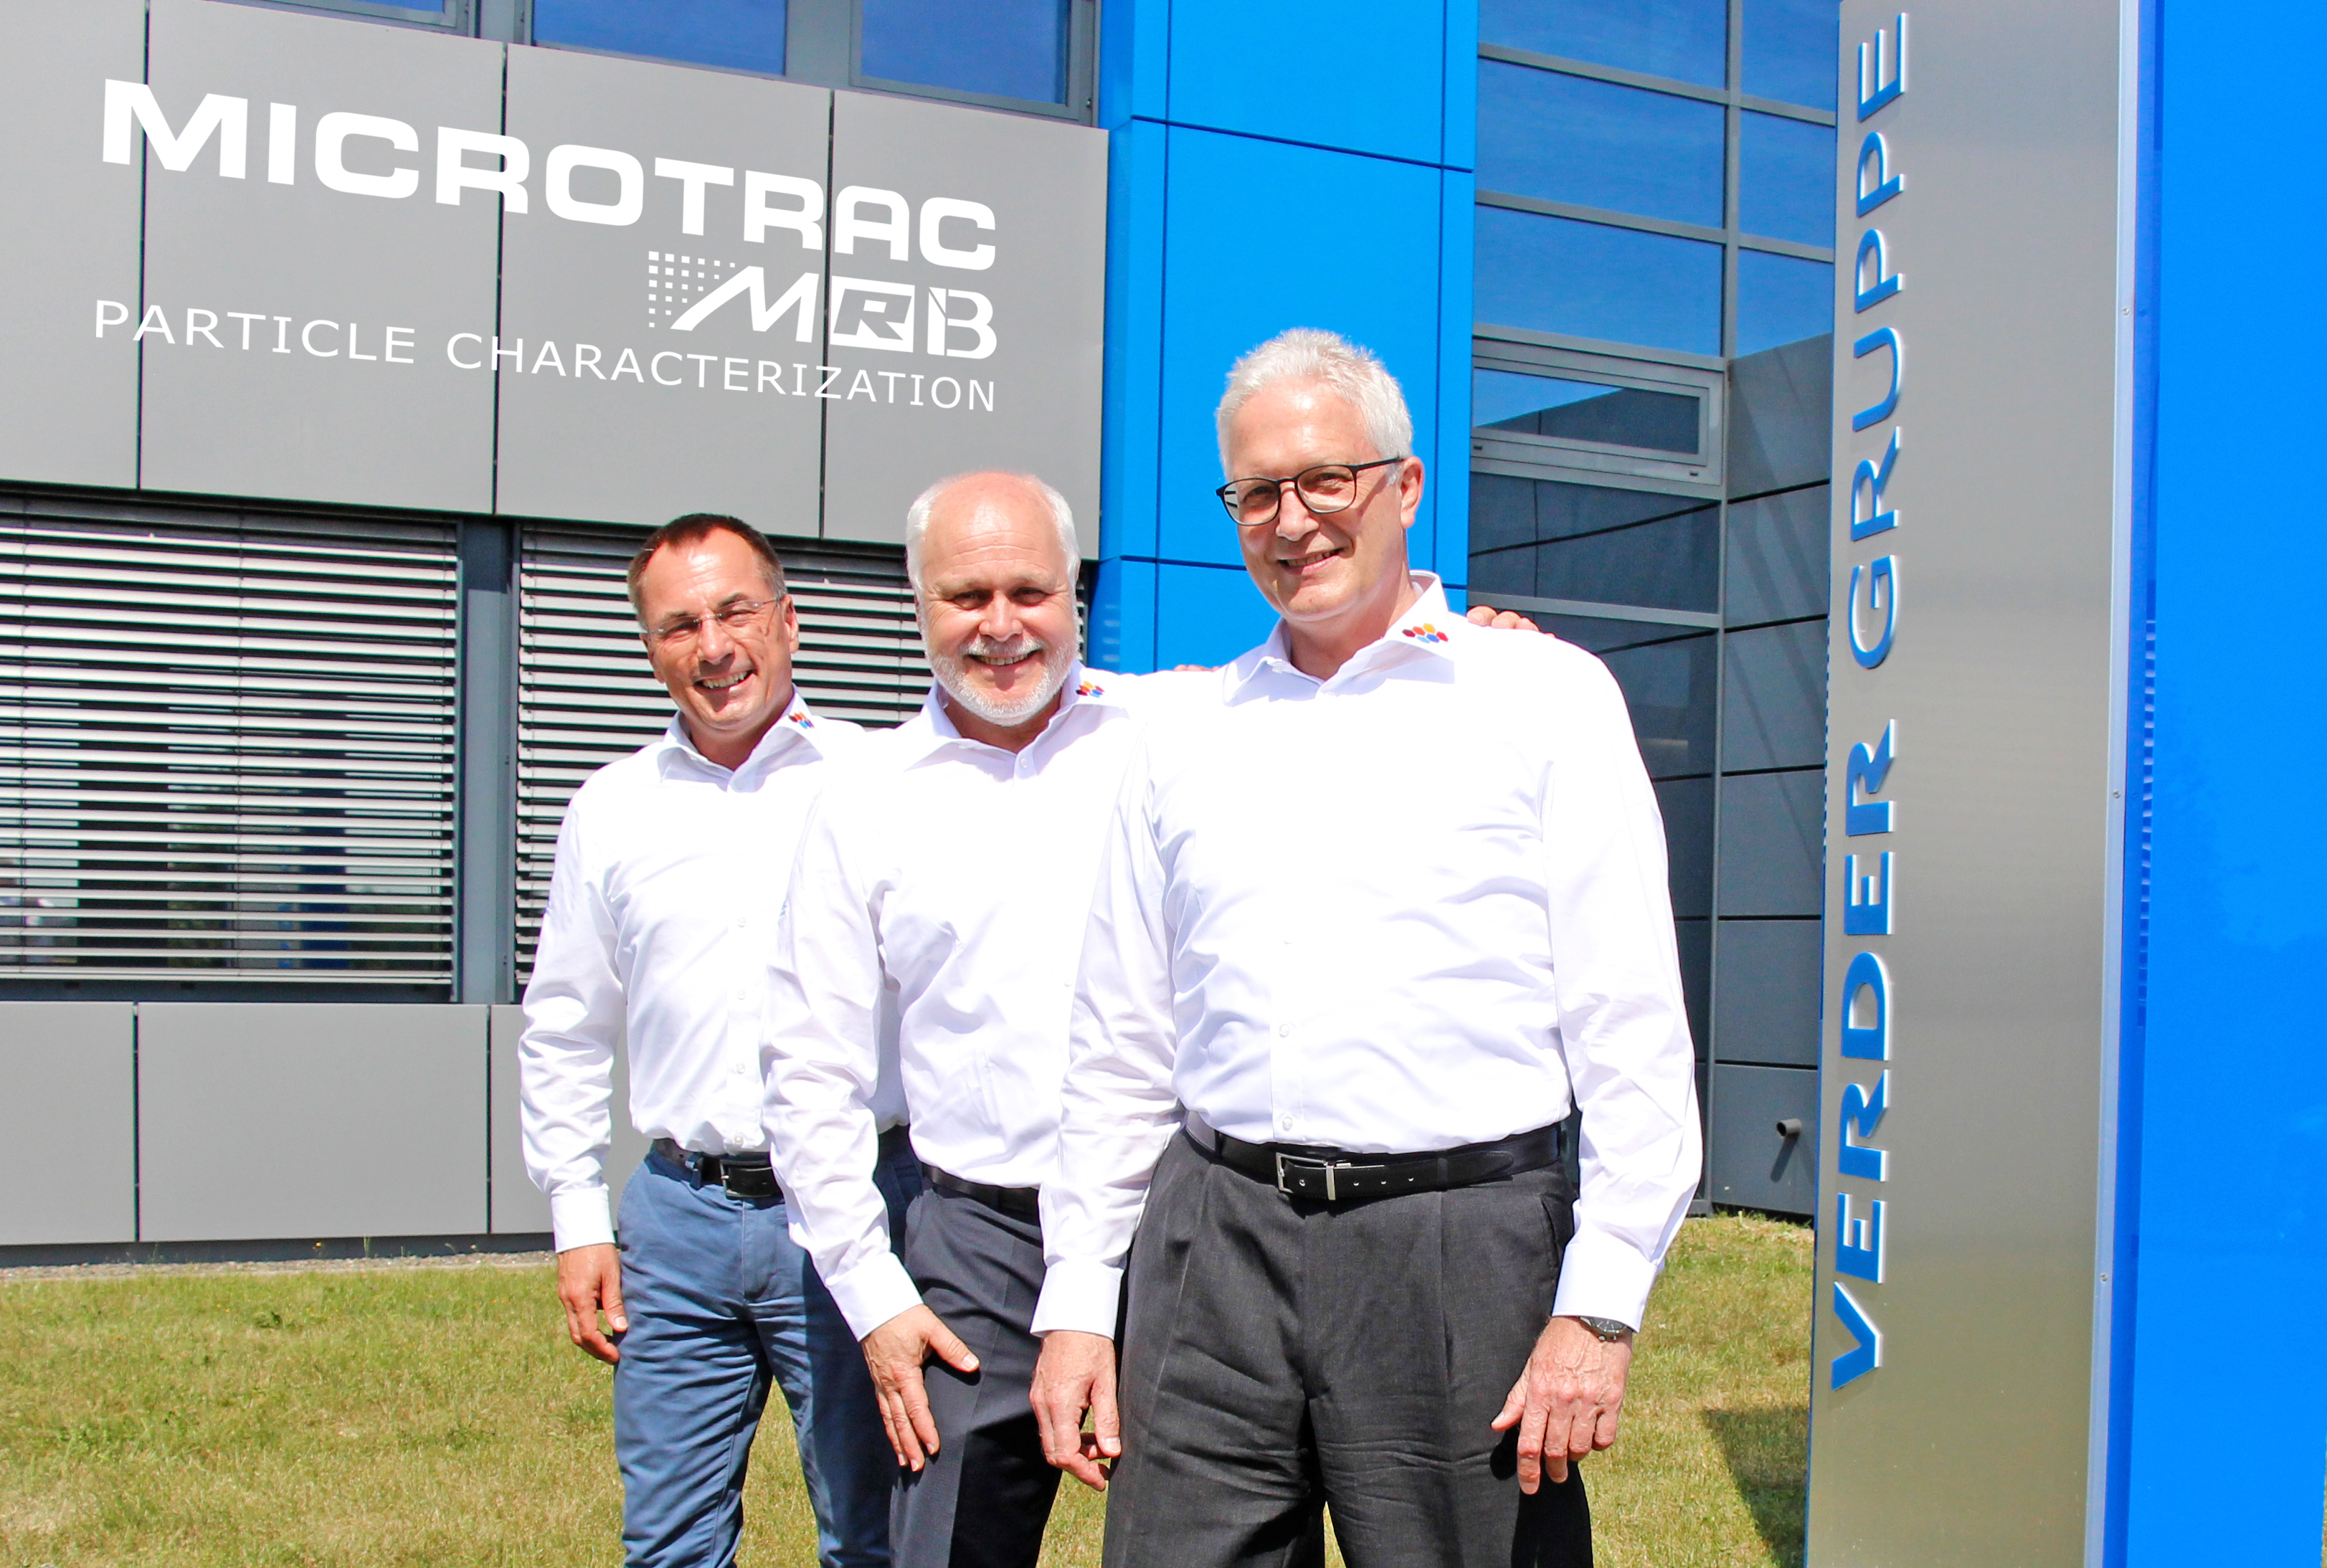 From left to right: Dr Jürgen Pankratz, CEO of Verder Scientific and Microtrac MRB, Carsten Minkley and Dr Jürgen Adolphs, managing directors of Porotec.